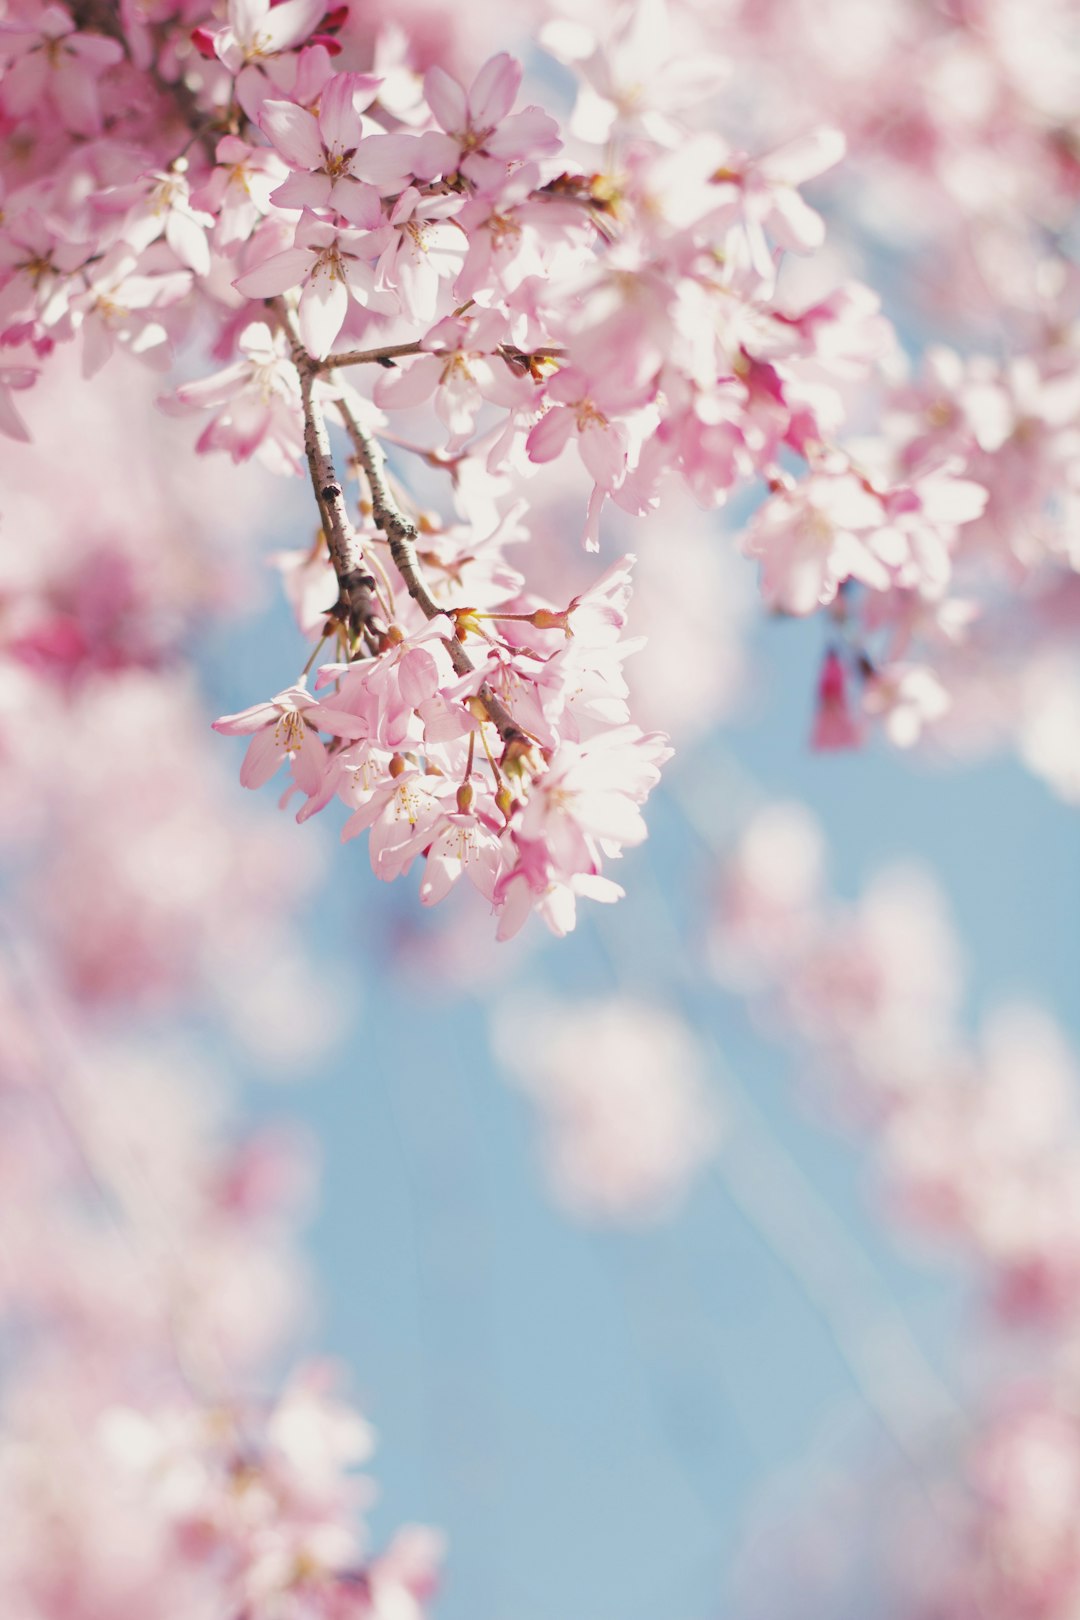 500+ Cherry Blossoms Pictures | Download Free Images on Unsplash